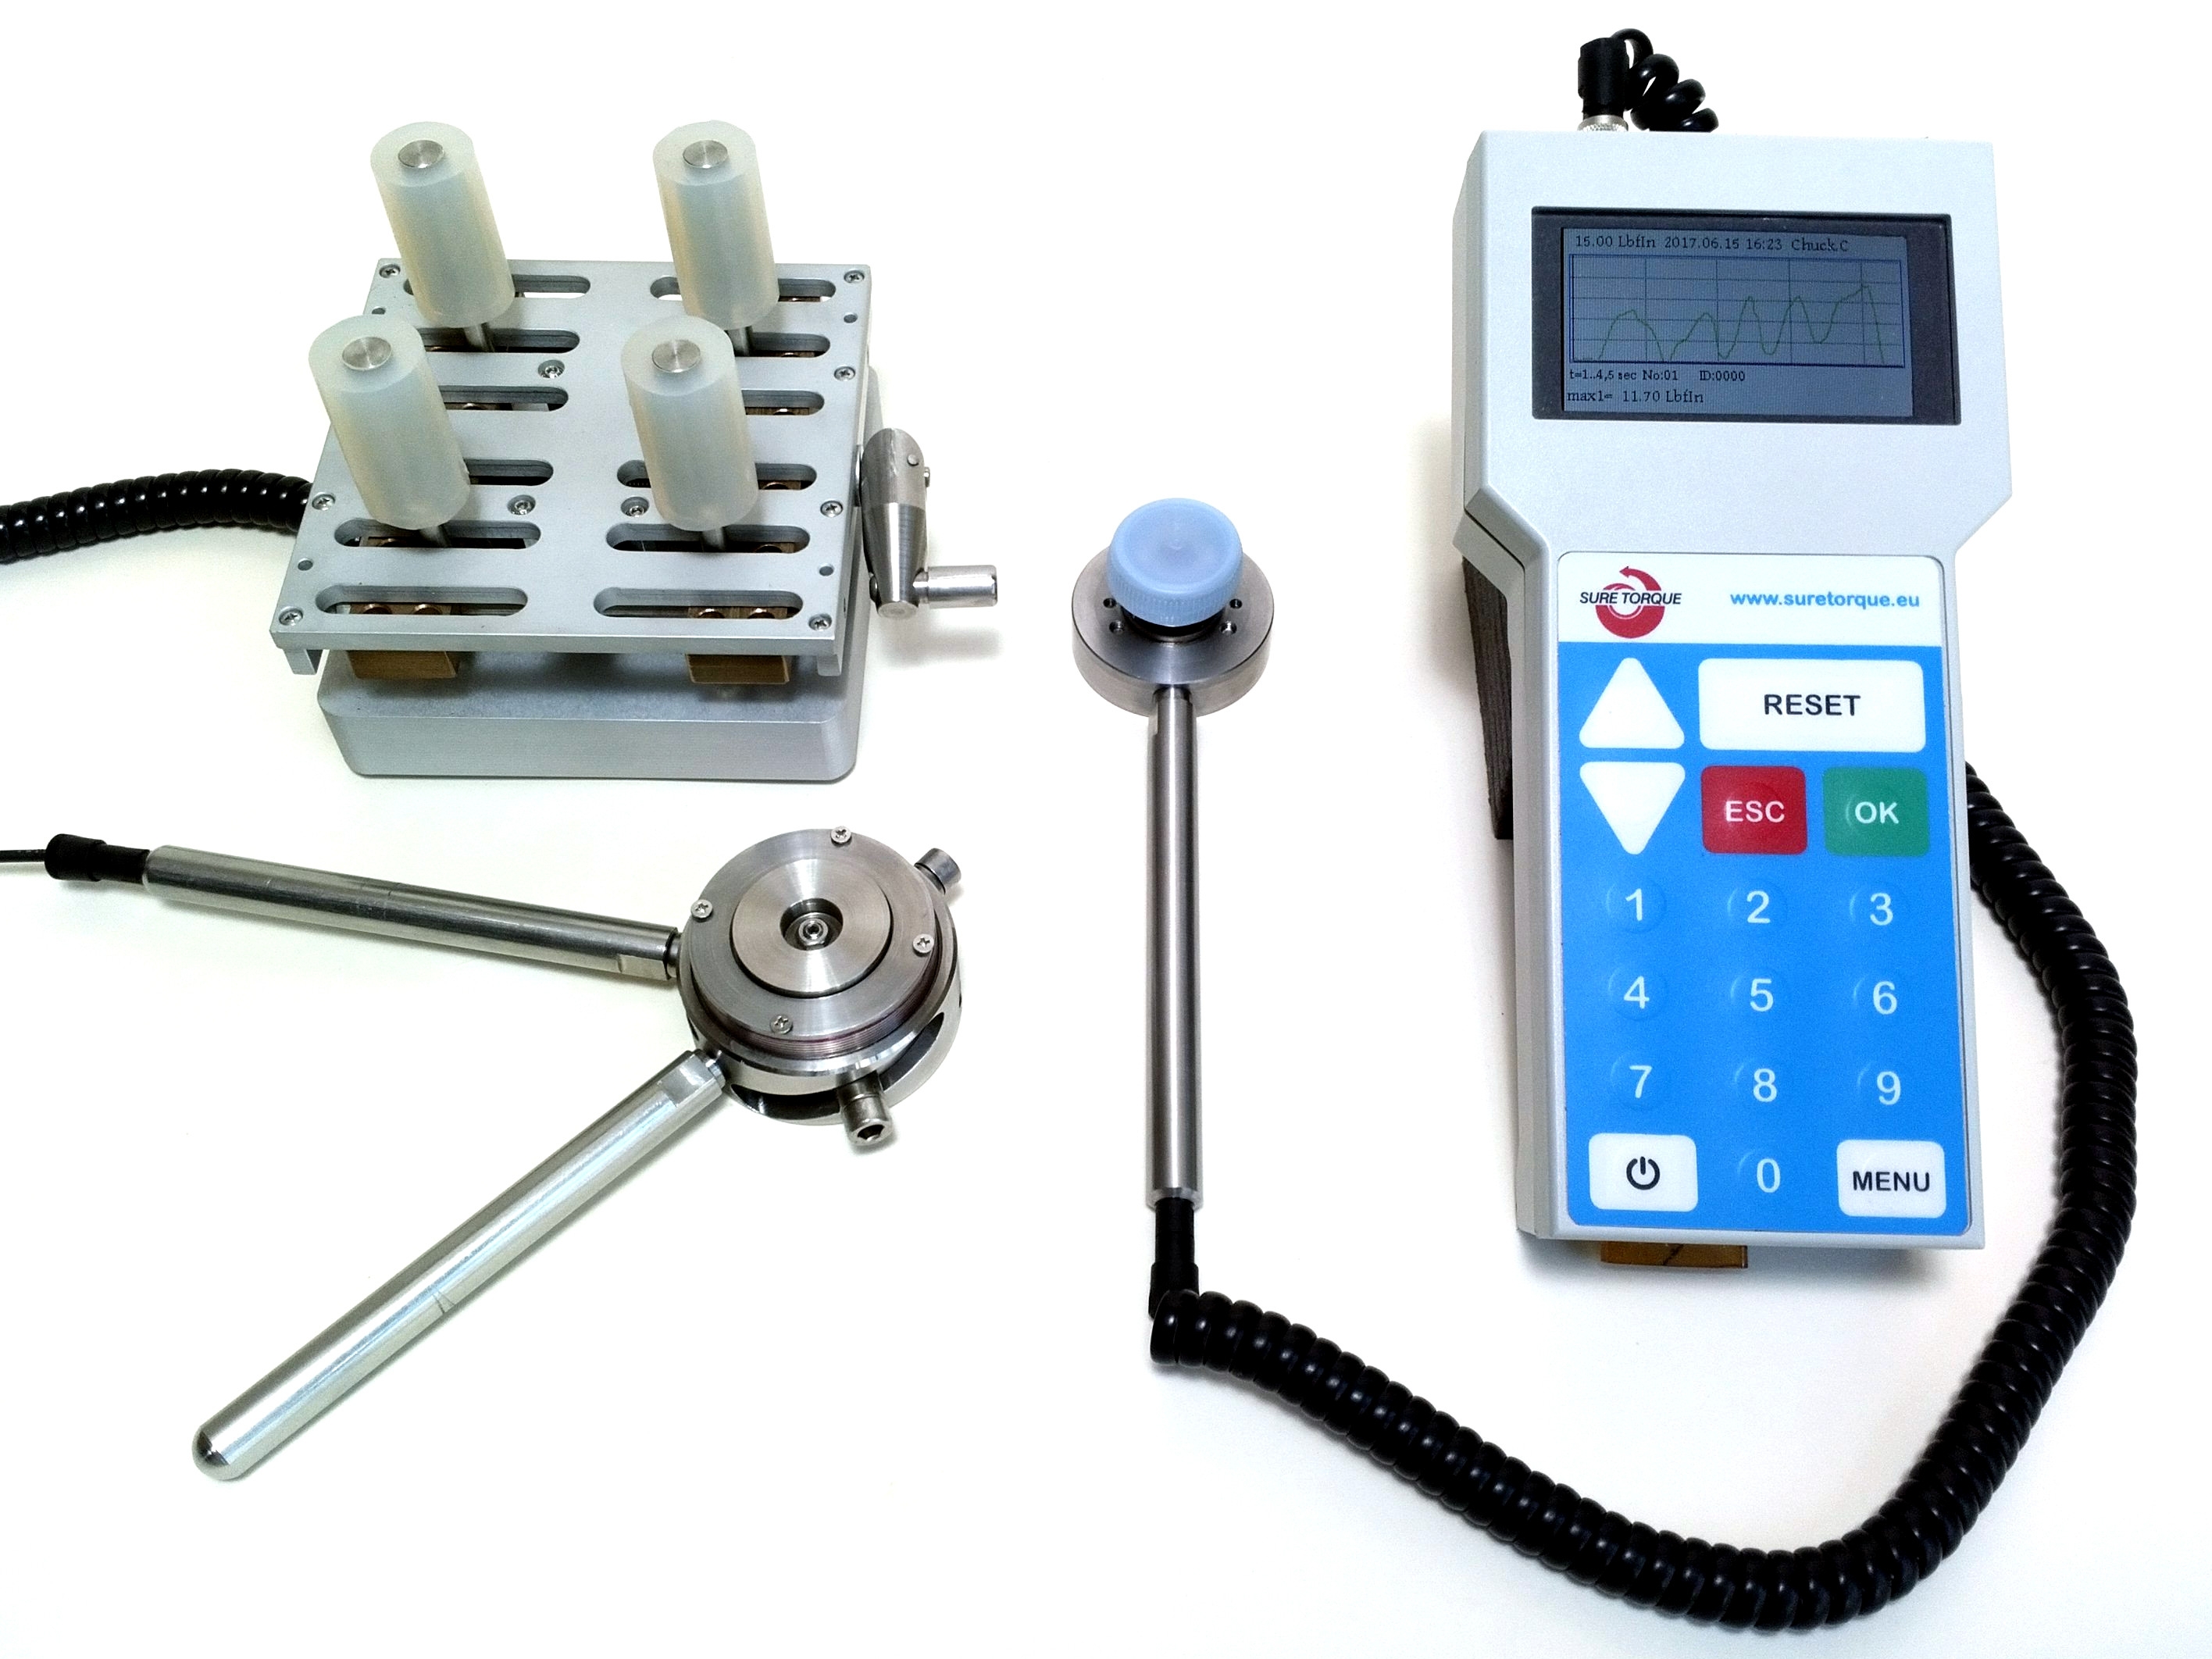 ST-H6 universal torque - top load force tester